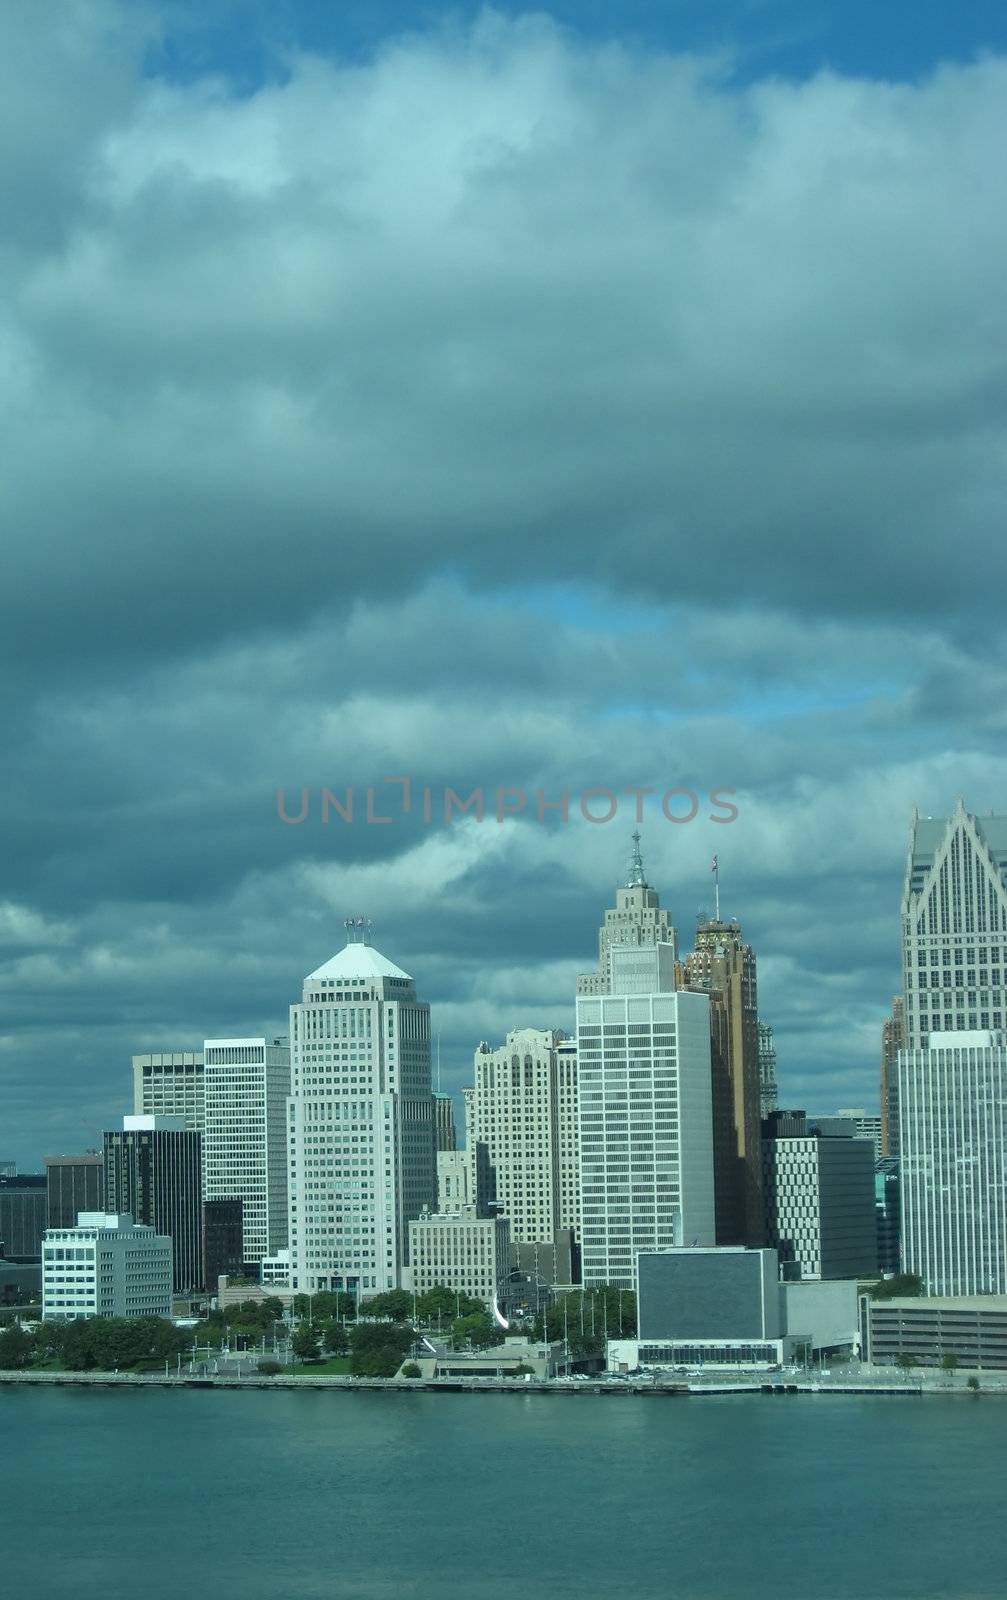 City of Detroit Skyline by loongirl